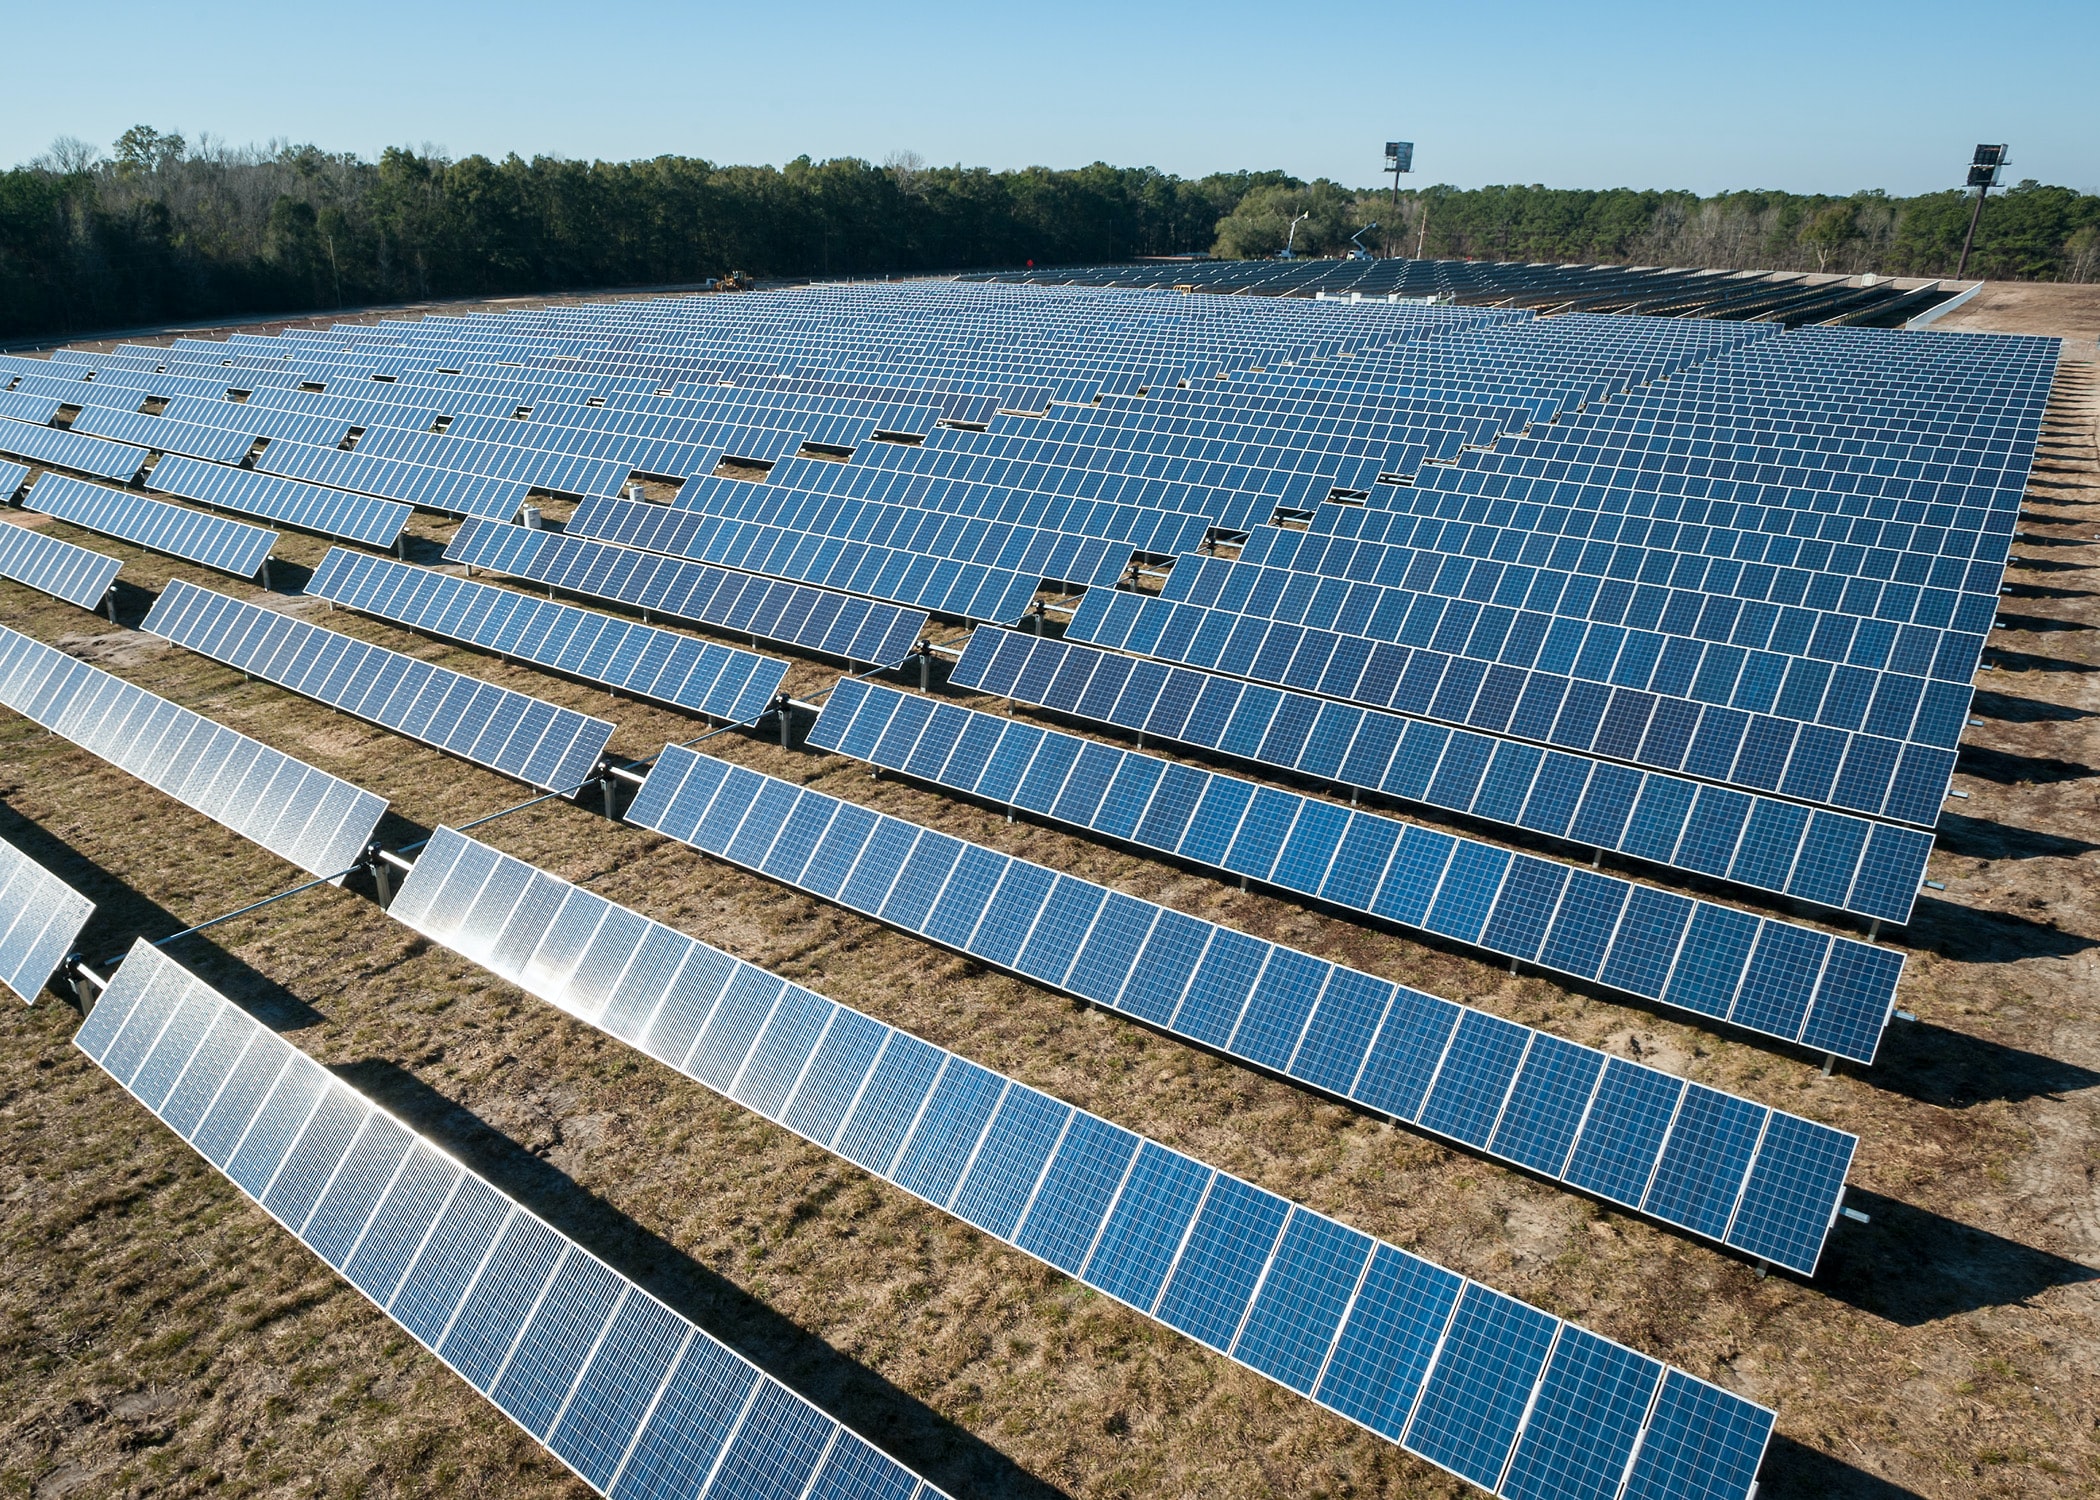 NEWS | Council’s planning committee set to decide whether to grant permission for huge solar farm that could provide power for more than 11,000 homes